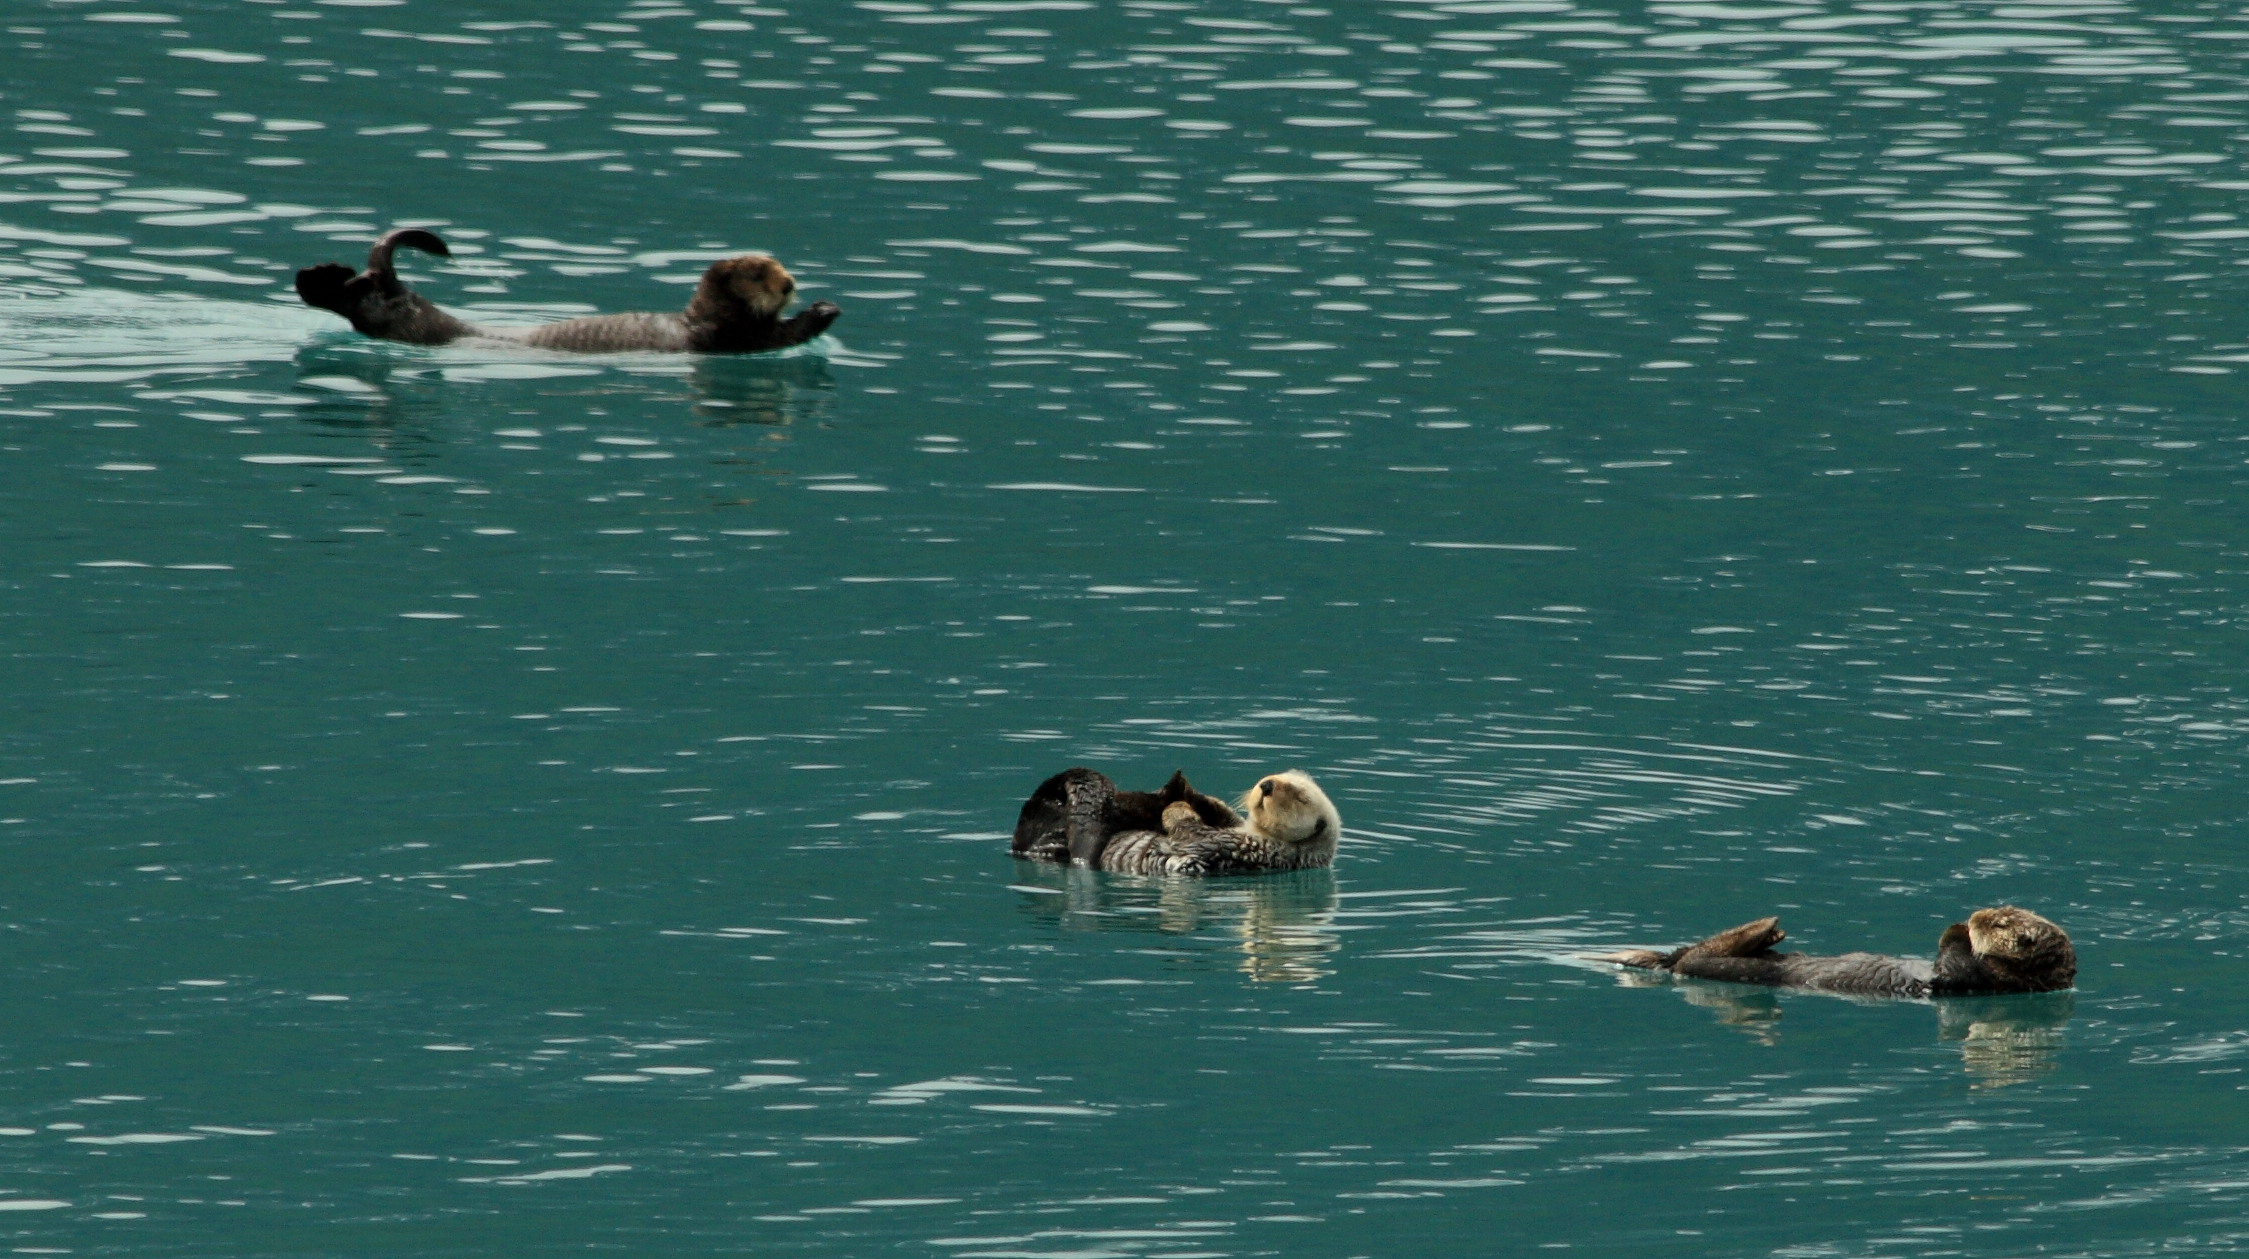 three sea otter swimming in a large body of water